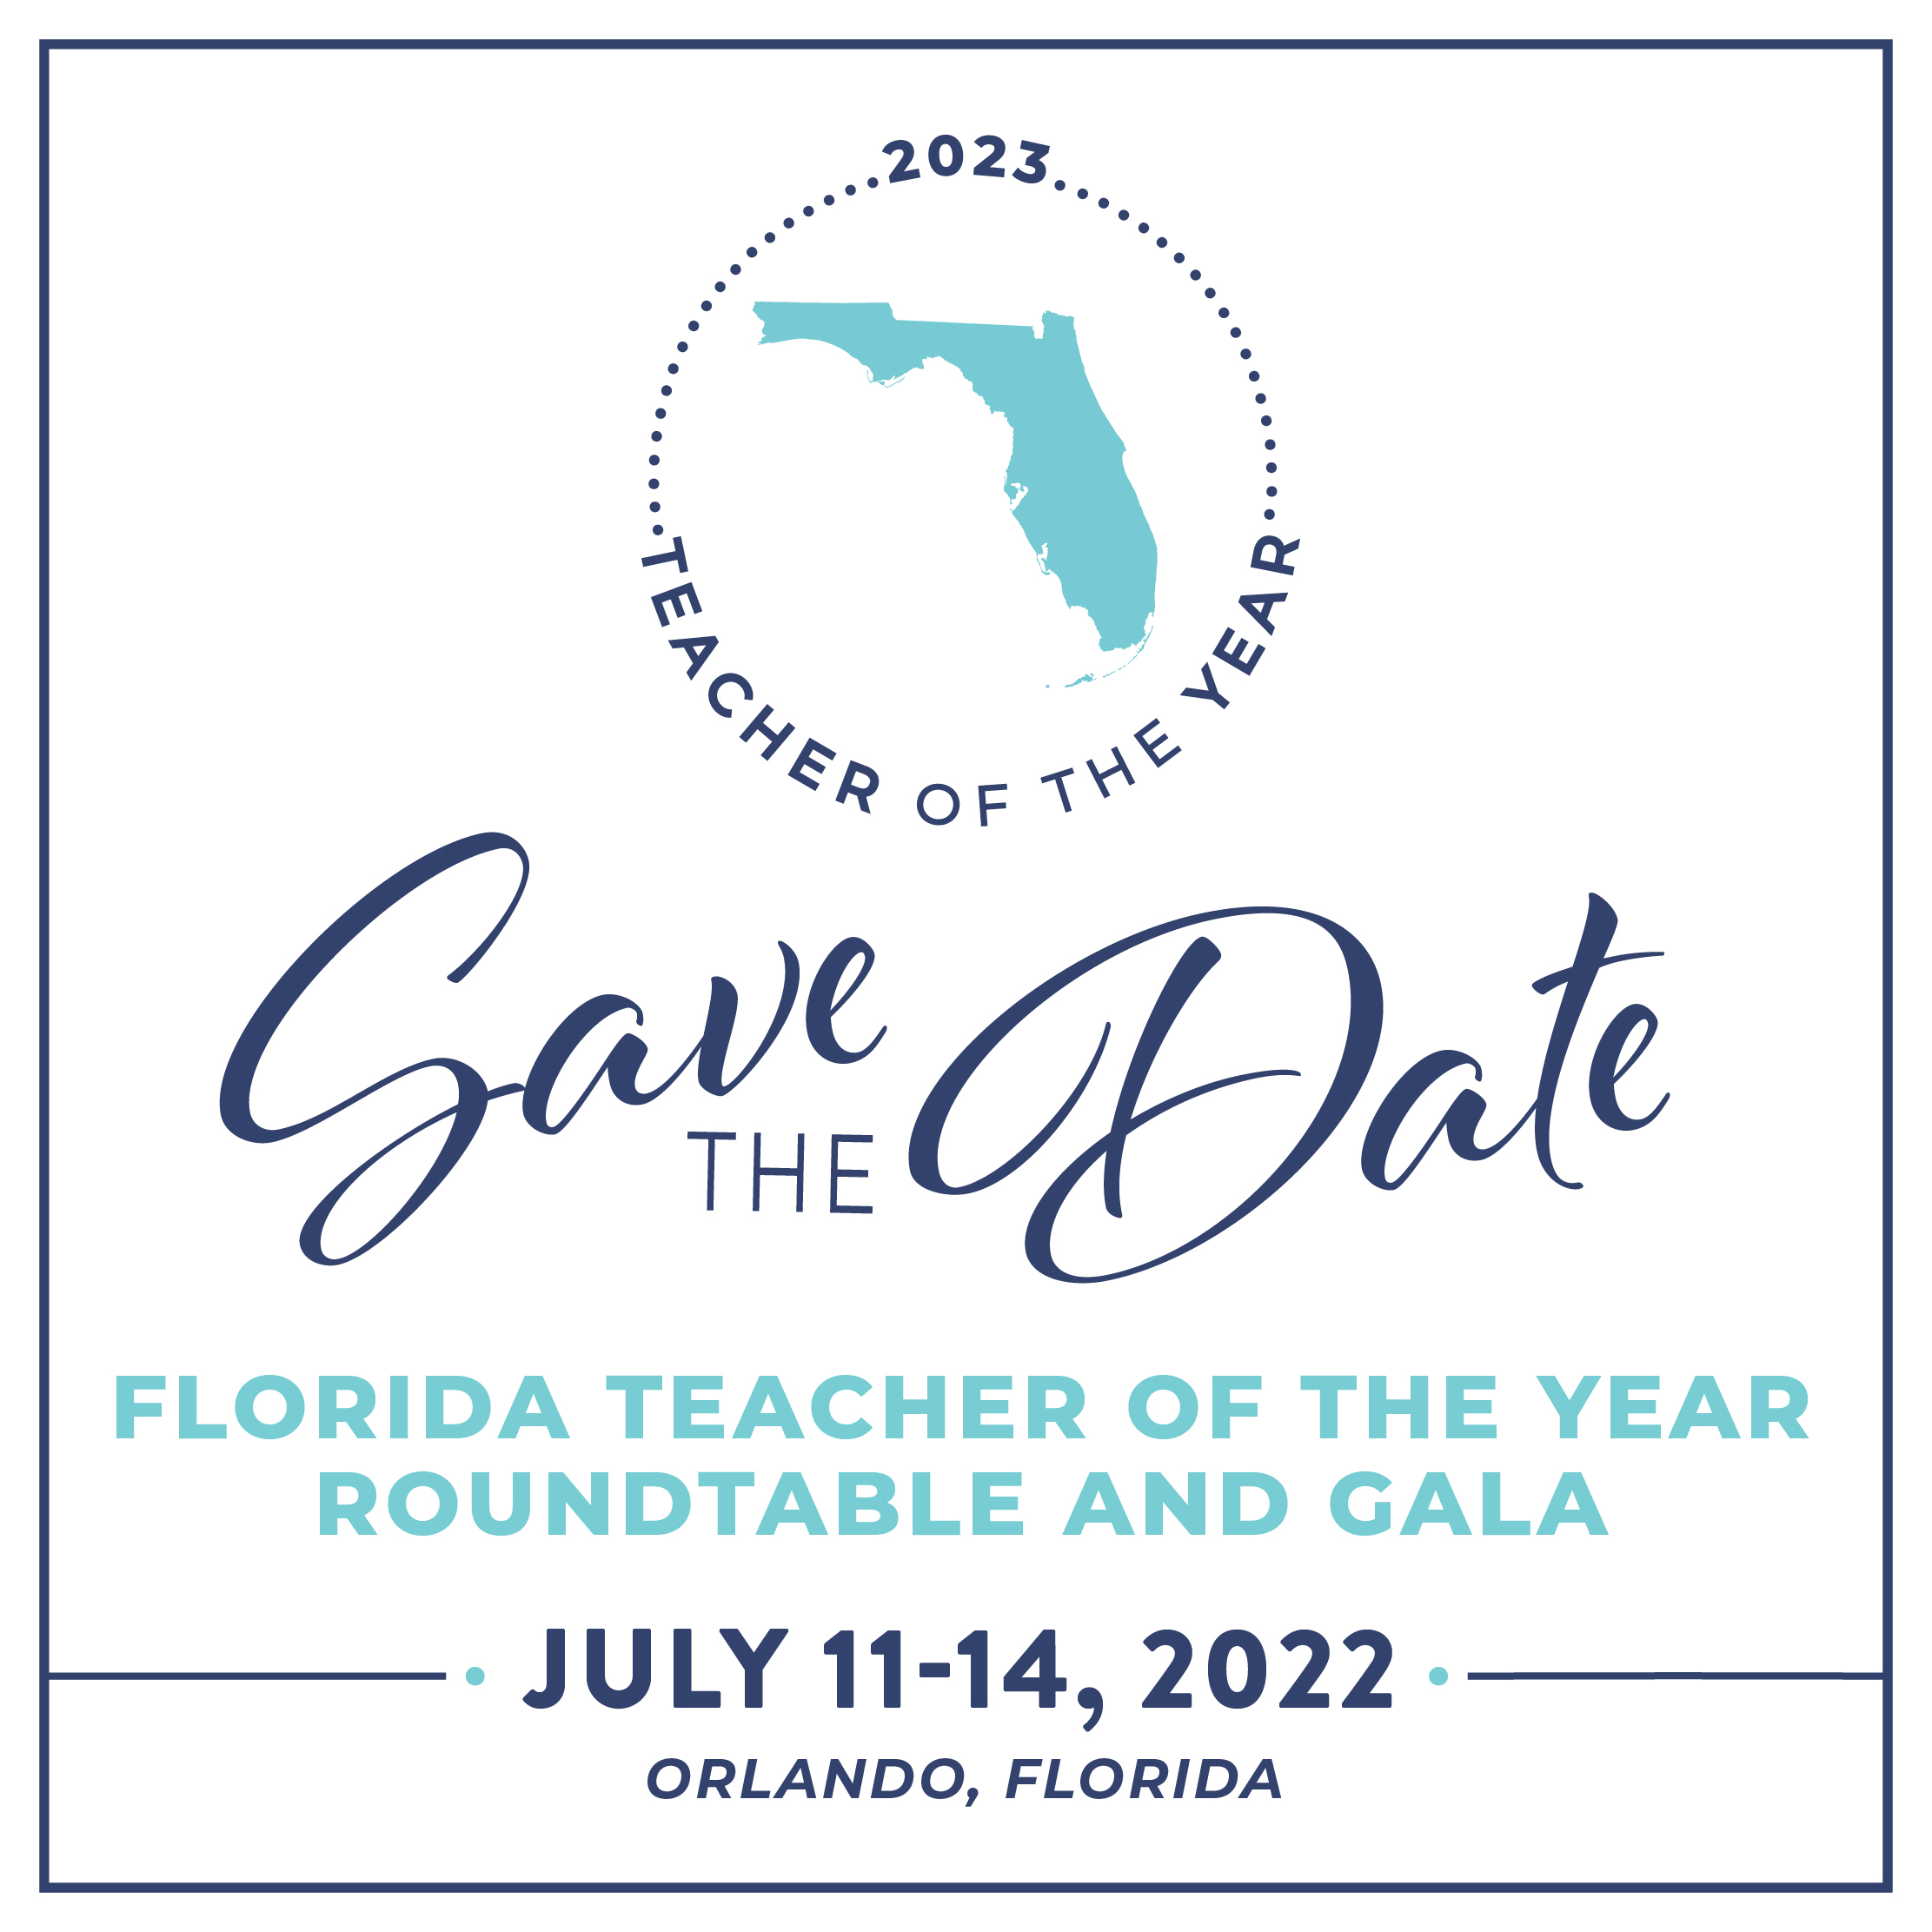 2023 Teacher of the Year Save the Date Florida Teacher of the Year Roundtable and Gala - July 11-14, 2022 - Orlando, FL